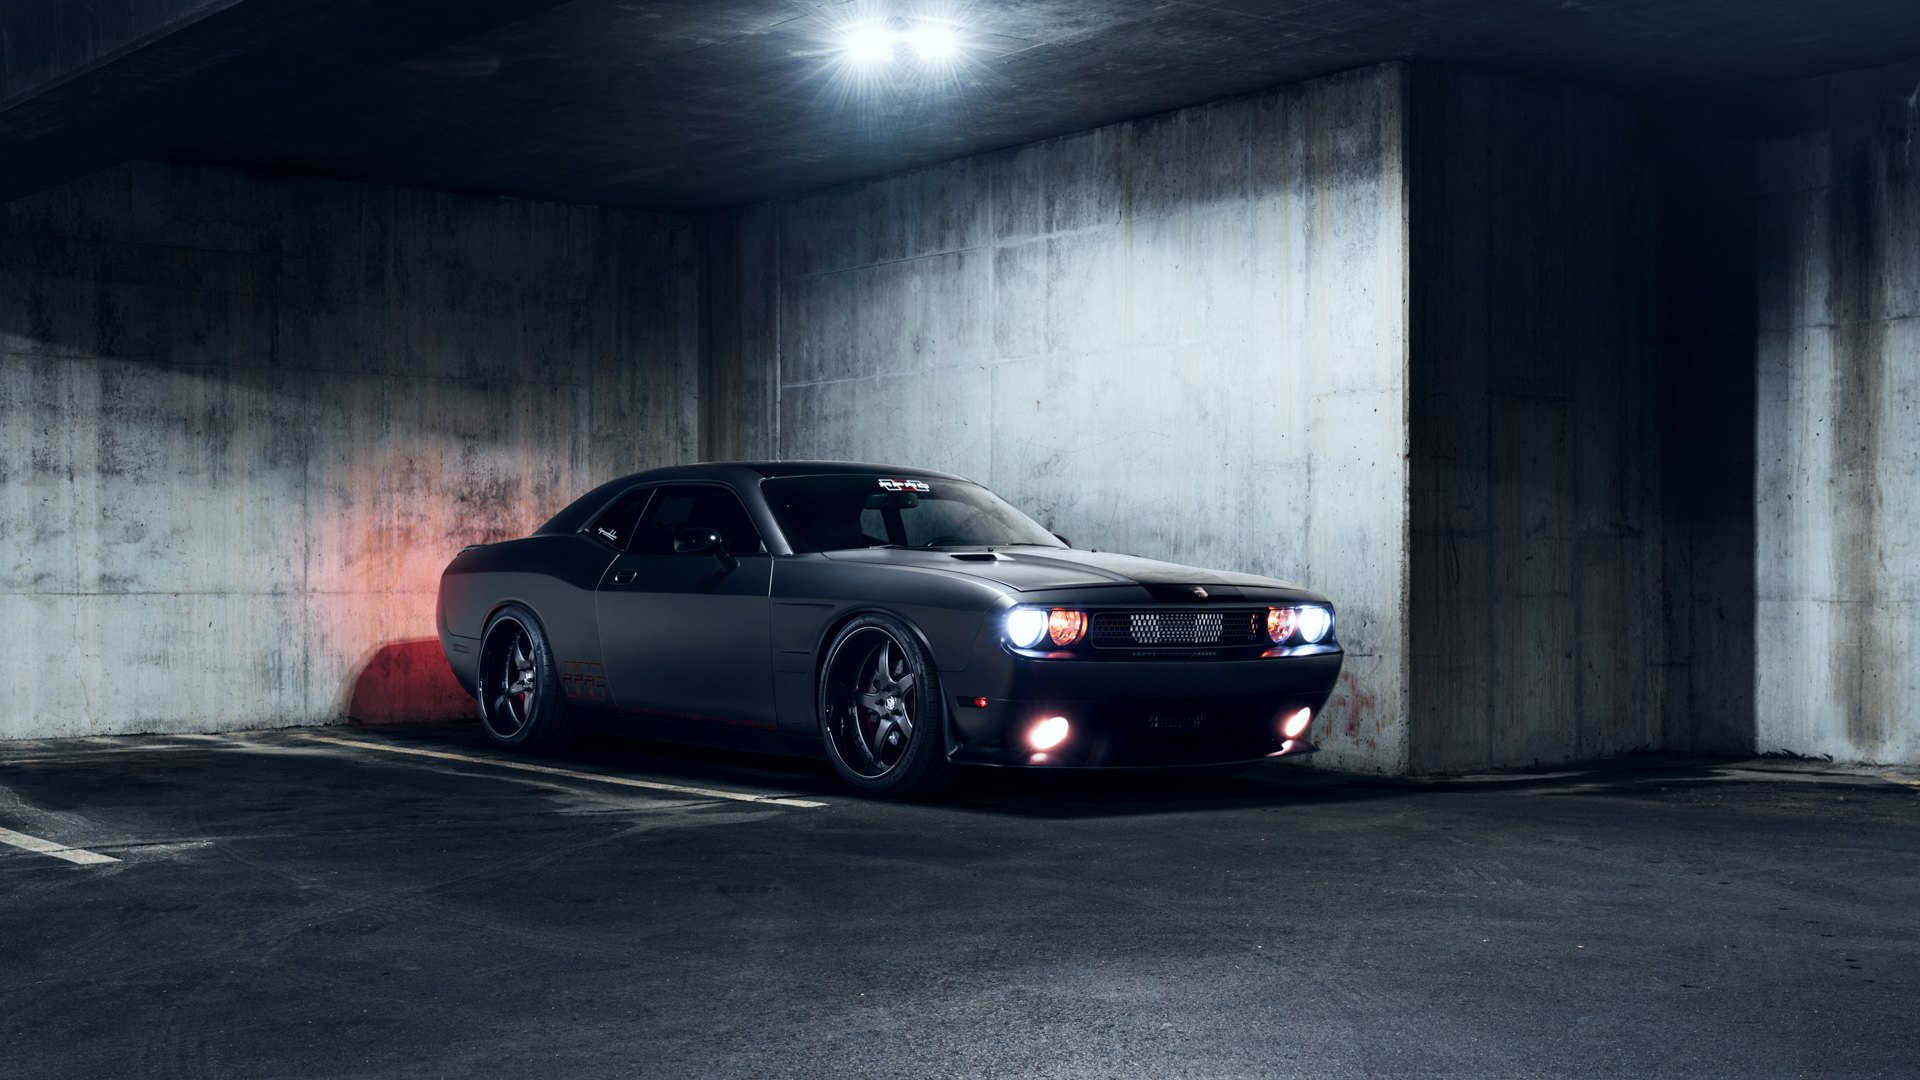 Matte Gray Dodge Challenger with Aftermarket Vented Hood - Photo by Arlen Liverman